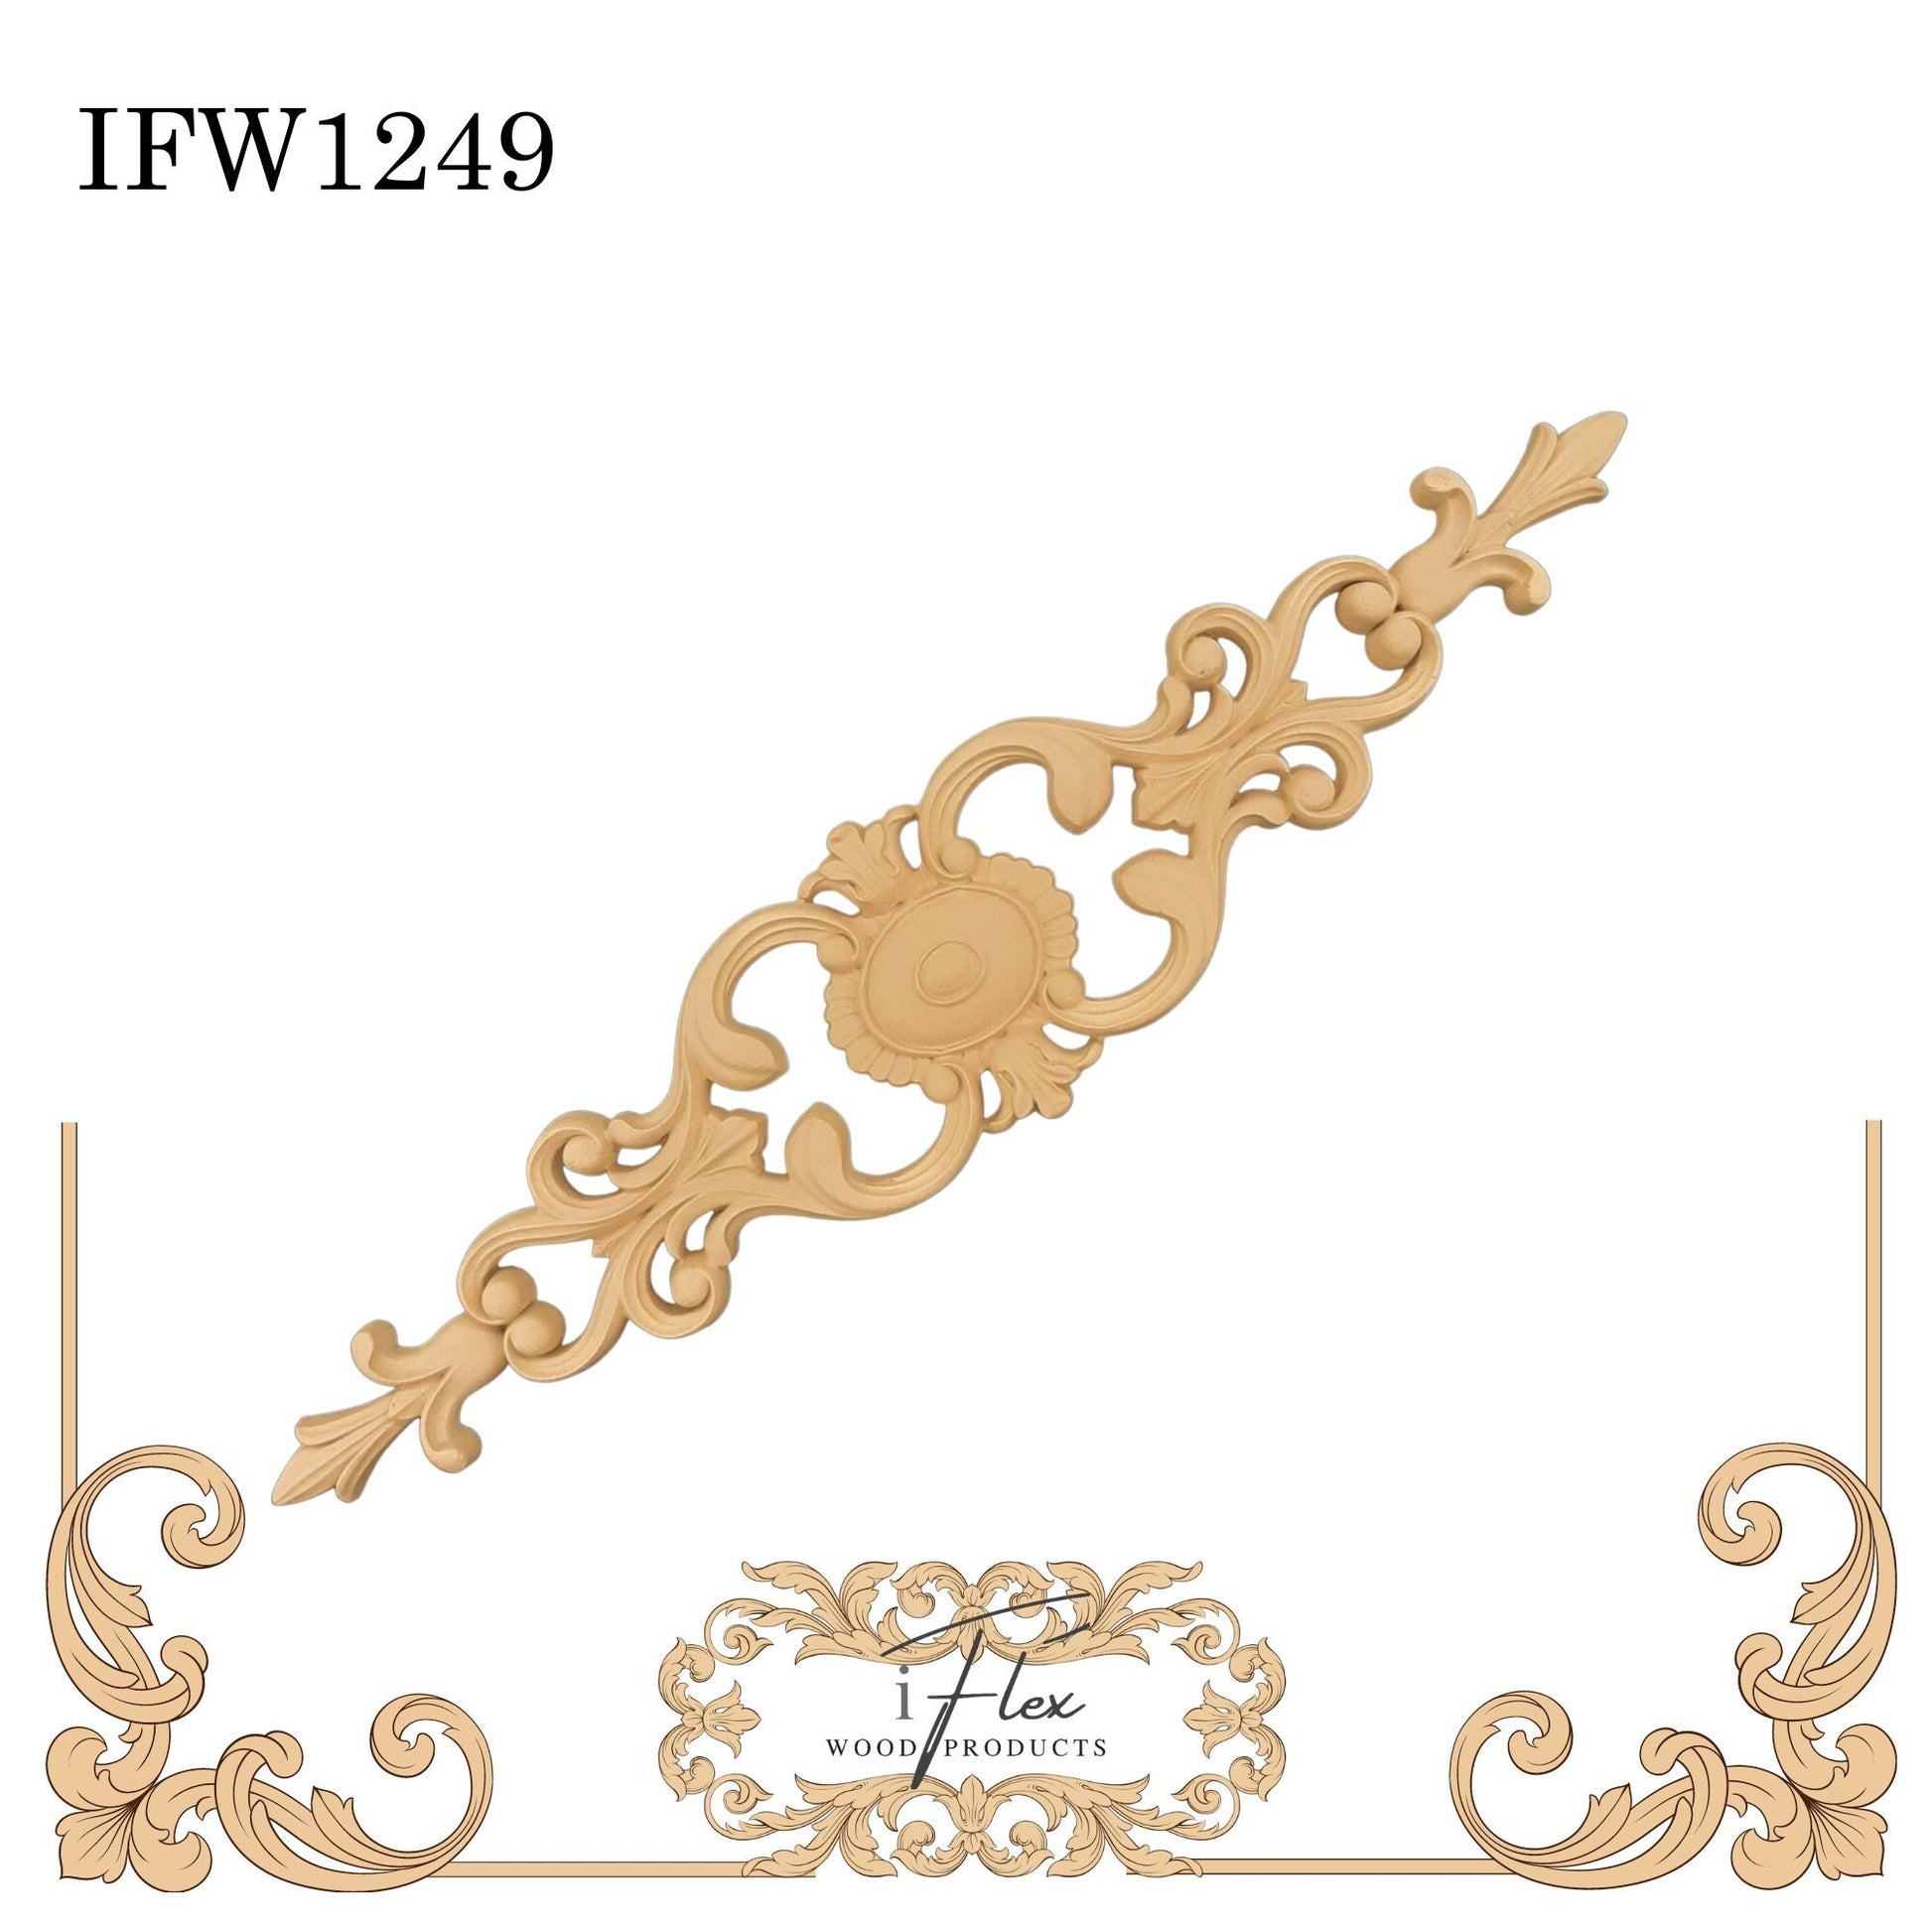 IFW 1249 iFlex Wood Products, bendable mouldings, flexible, wooden appliques, pediment